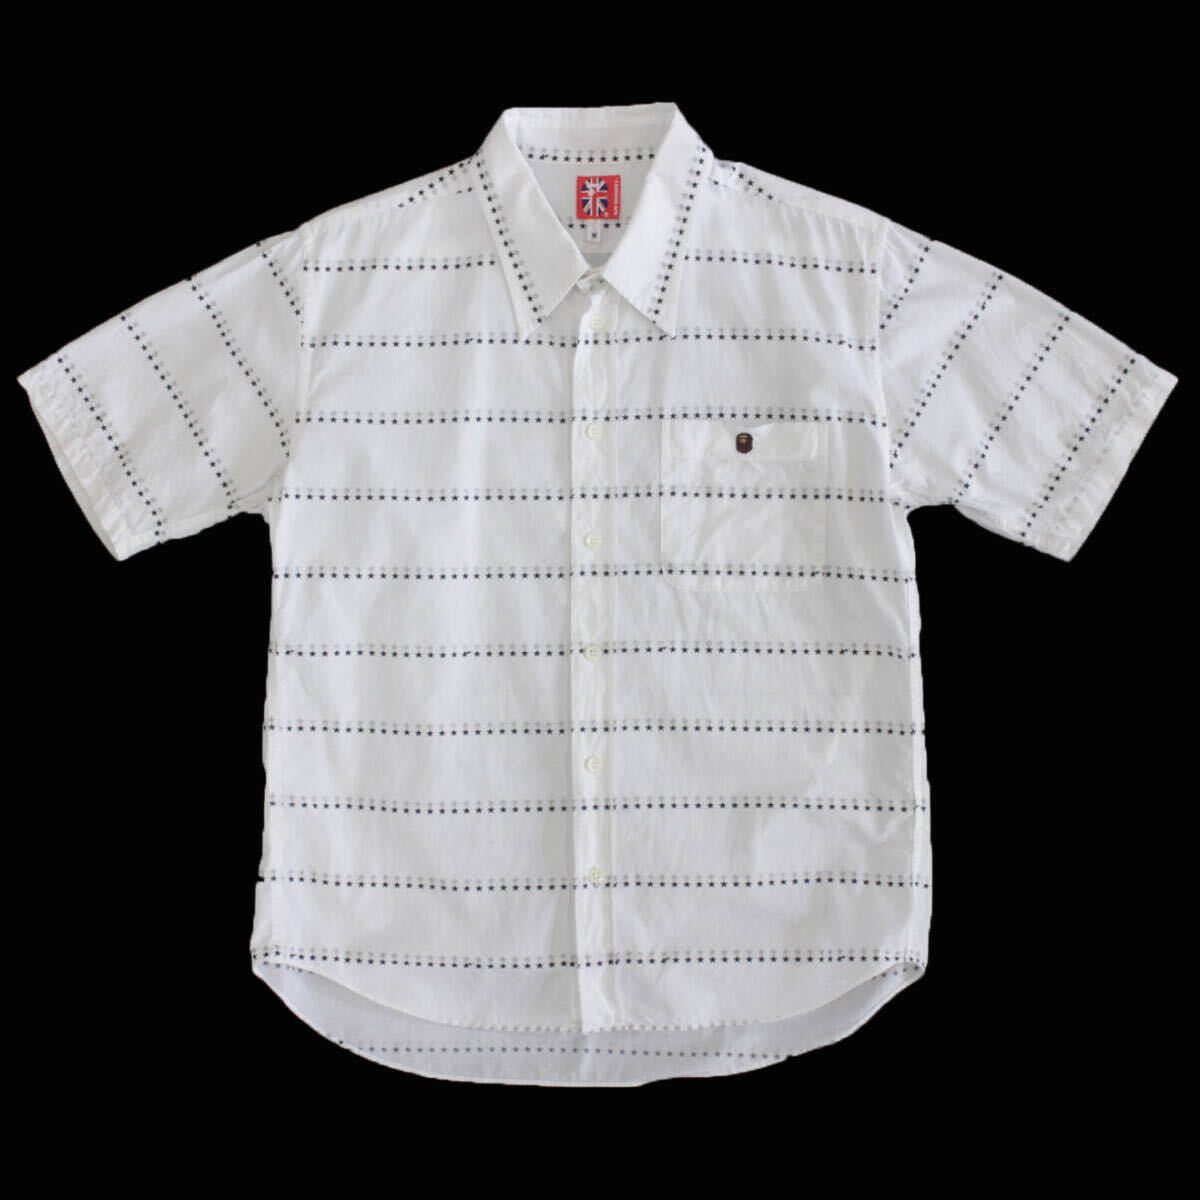  the first period A BATHING APE A Bathing Ape short sleeves shirt star pattern border white M made in Japan 